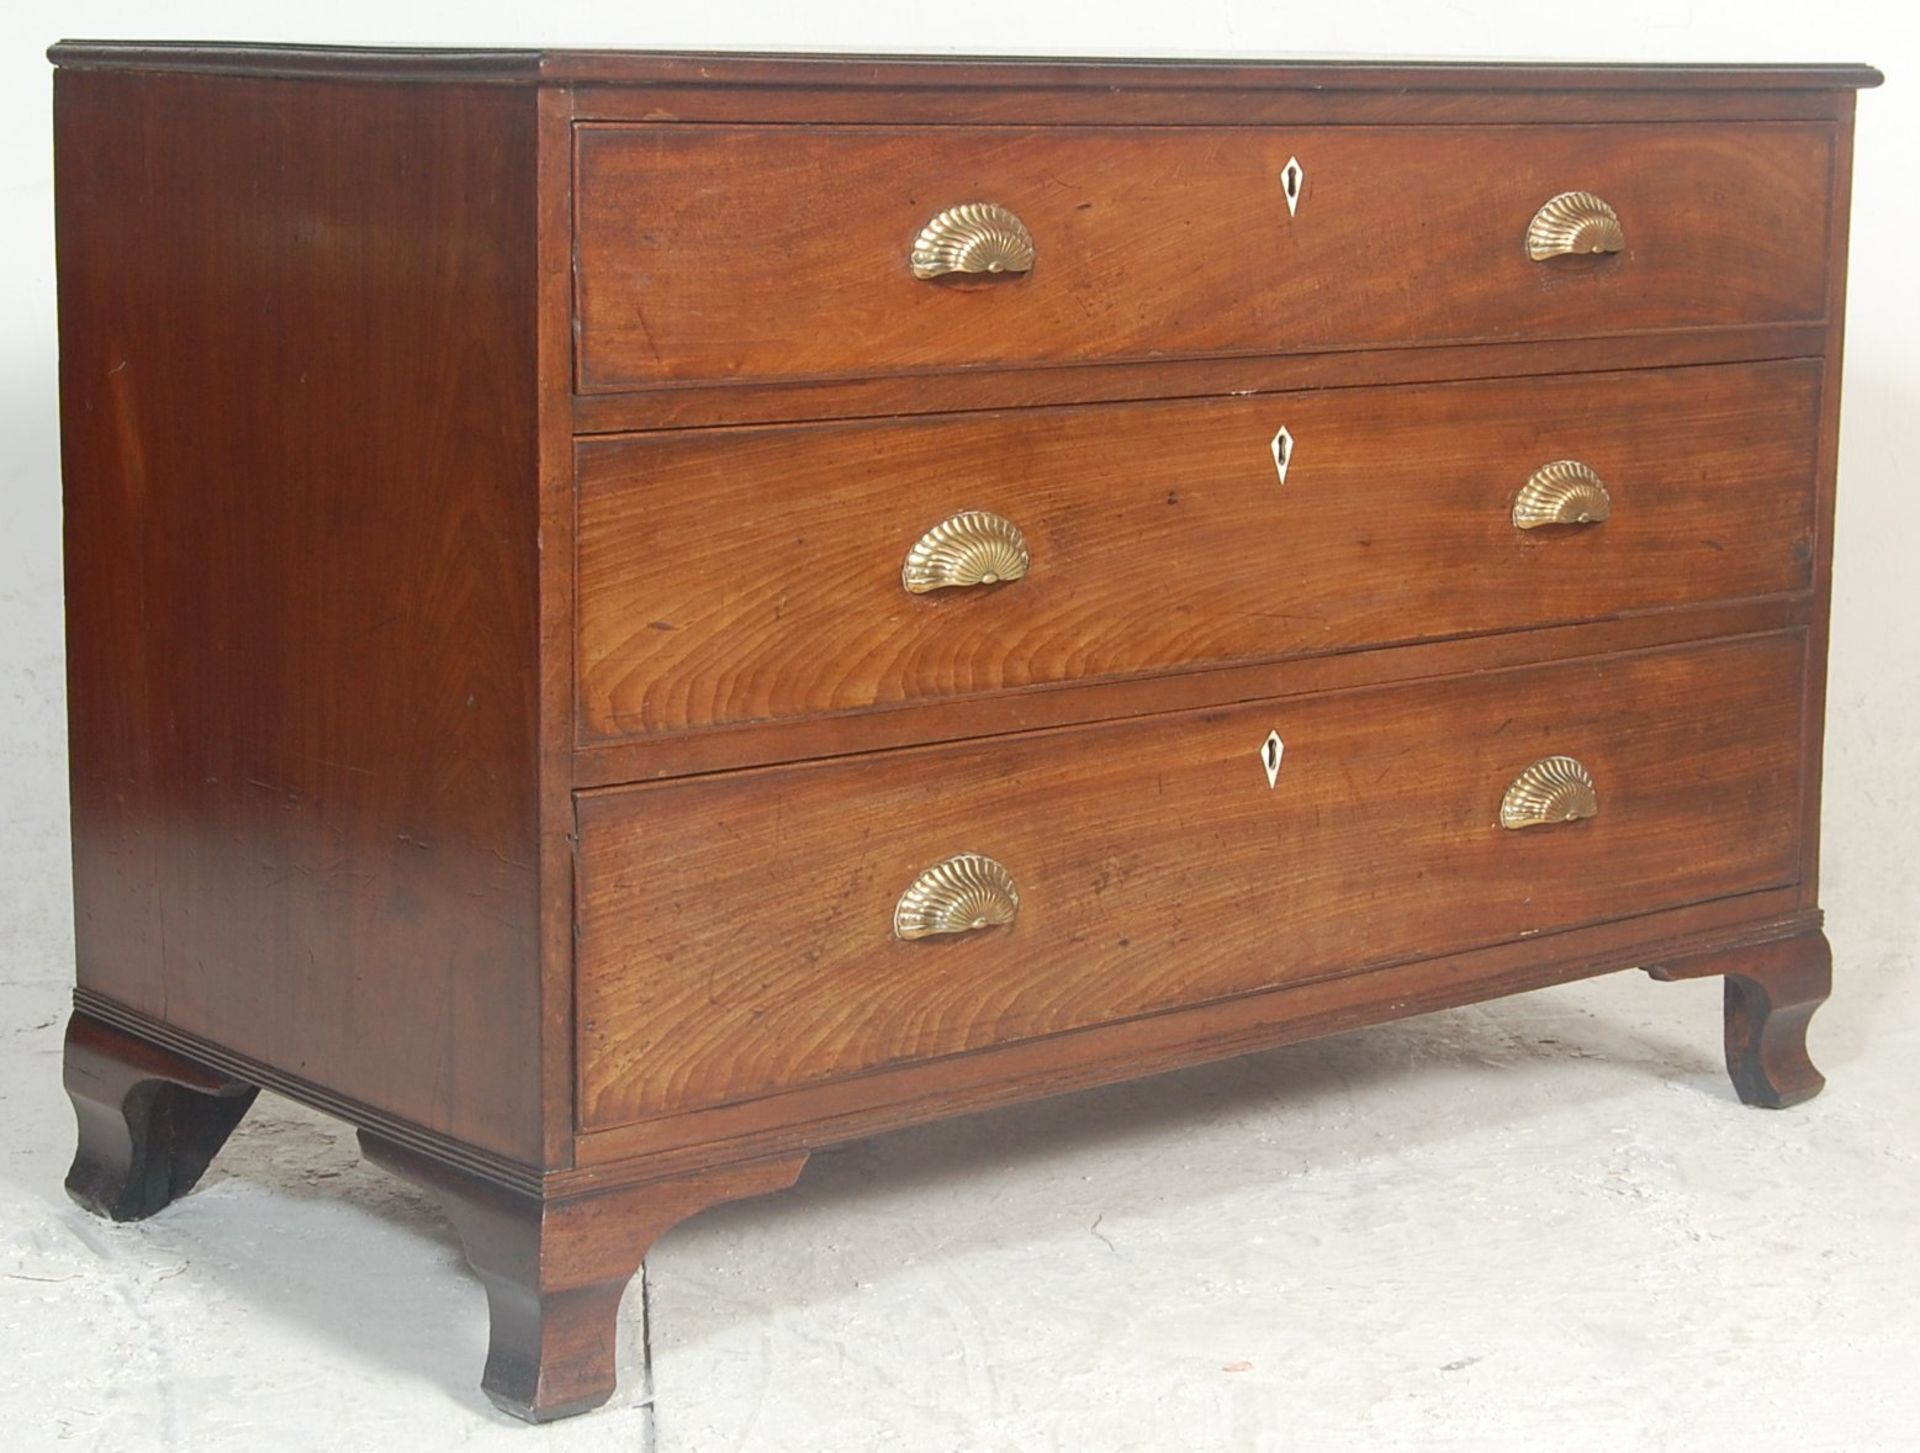 A 19th Century Victorian mahogany attic chest / bachelors chest having three drawers with brass